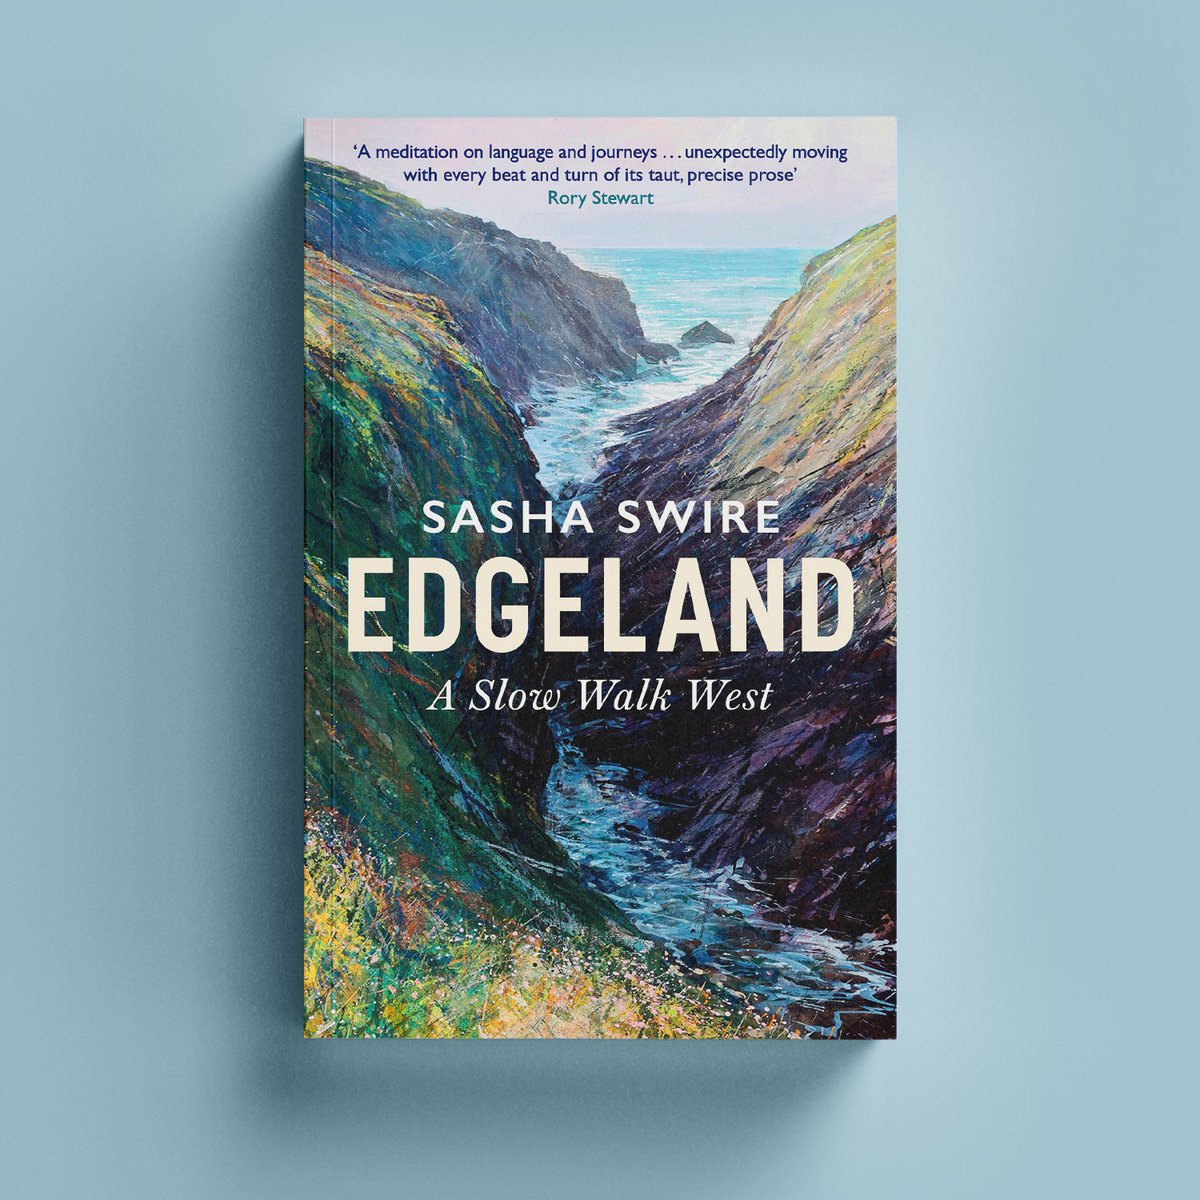 Political diarist @SashaSwire escapes the confines of Westminster to walk the northern stretch of the South West Coastal Path. An immersive and beguiling exploration of one of the most enigmatic and beautiful coastlines. Edgeland is out 6th June: brnw.ch/21wJJqx